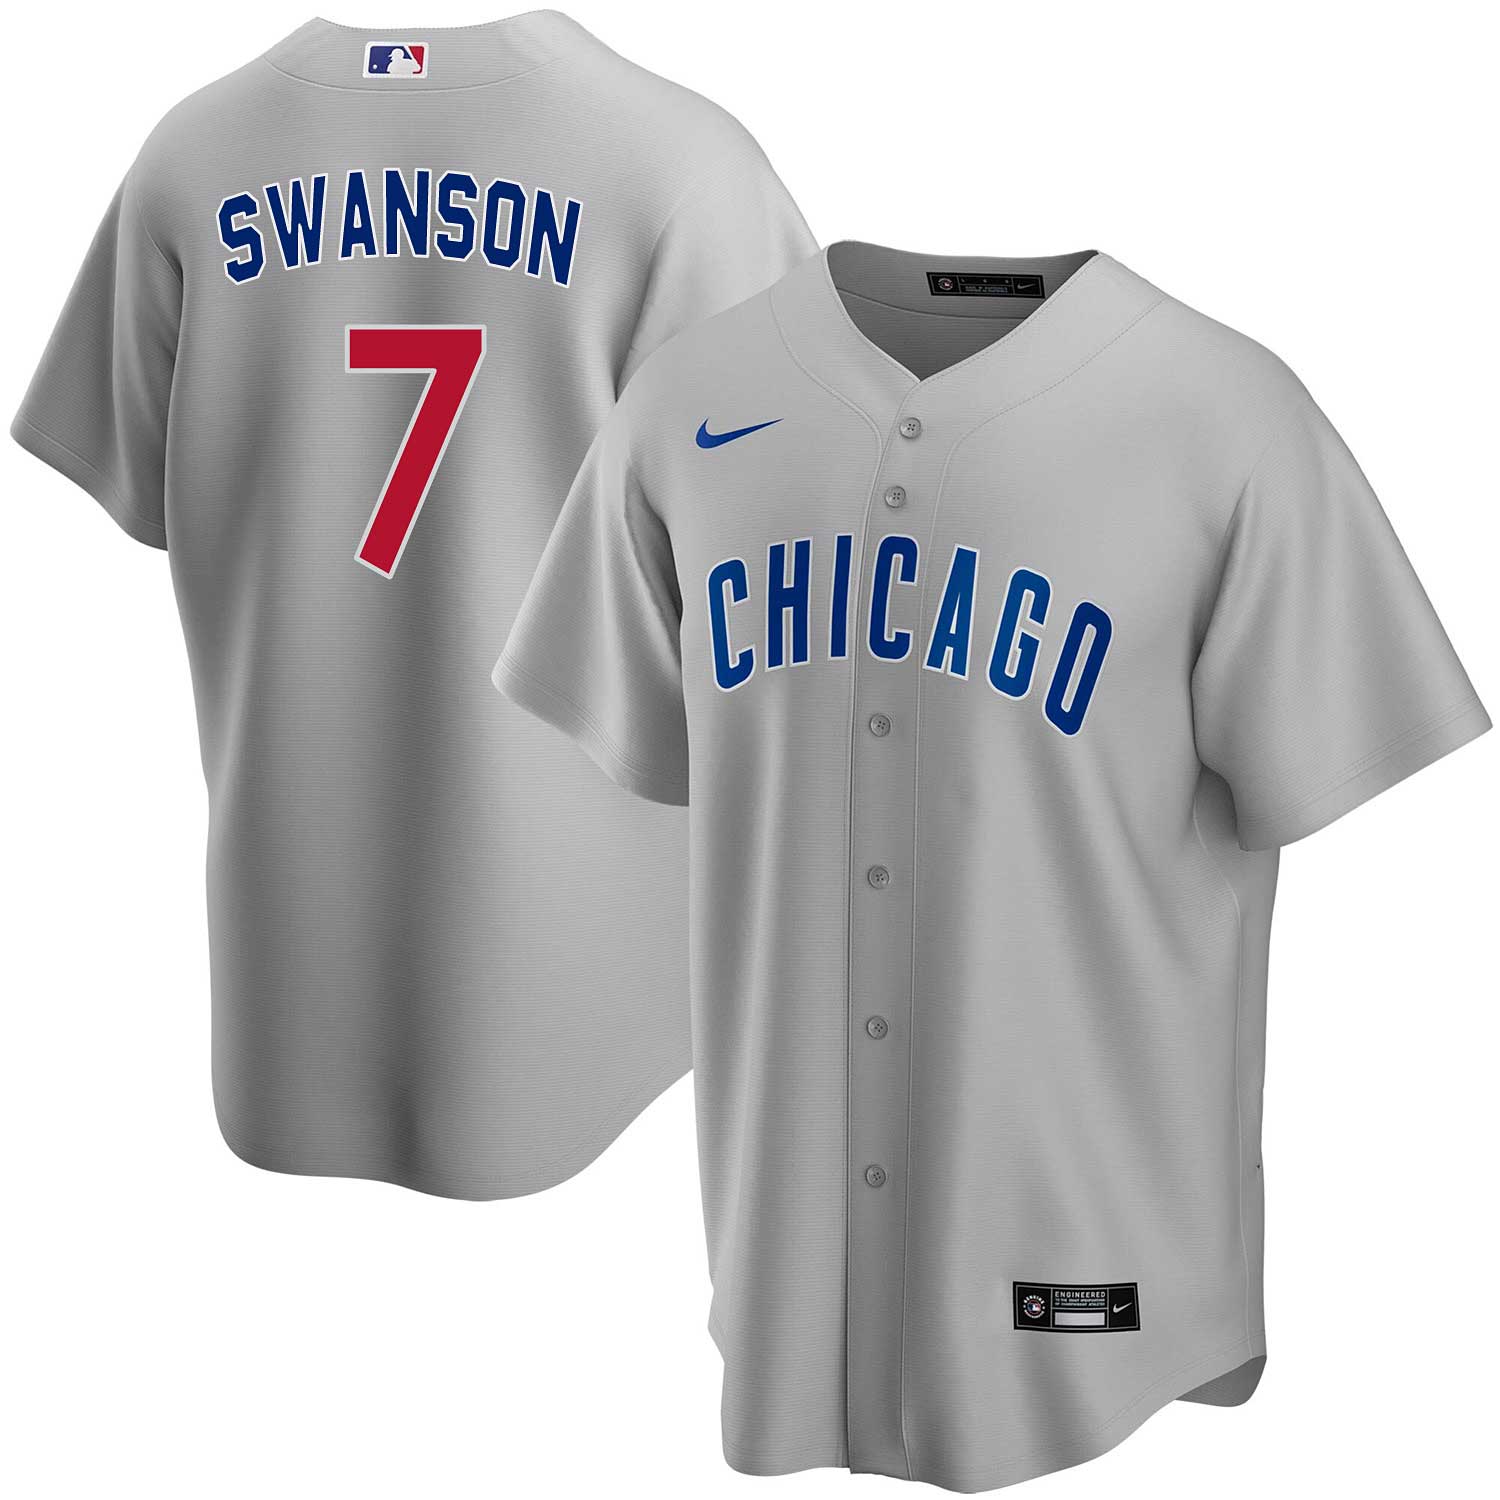 Men's Nike Dansby Swanson White Chicago Cubs Replica Player Jersey, XL